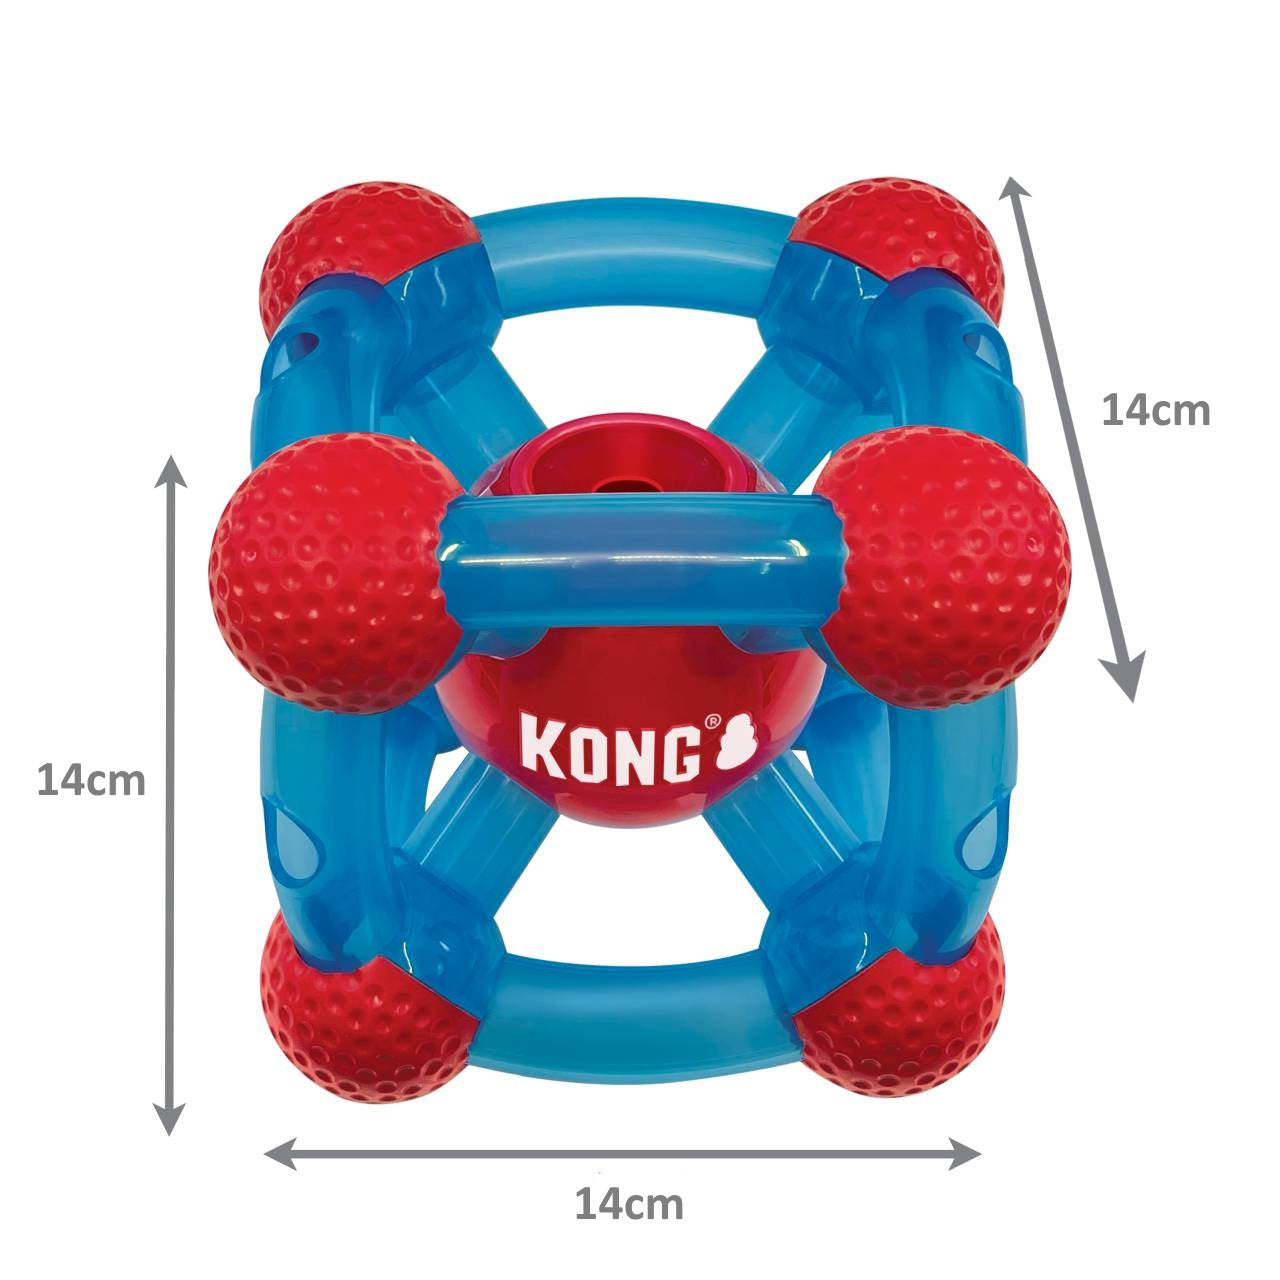 KONG Rewards Tinker Treat Dispensing Dog Toy - Pets and More